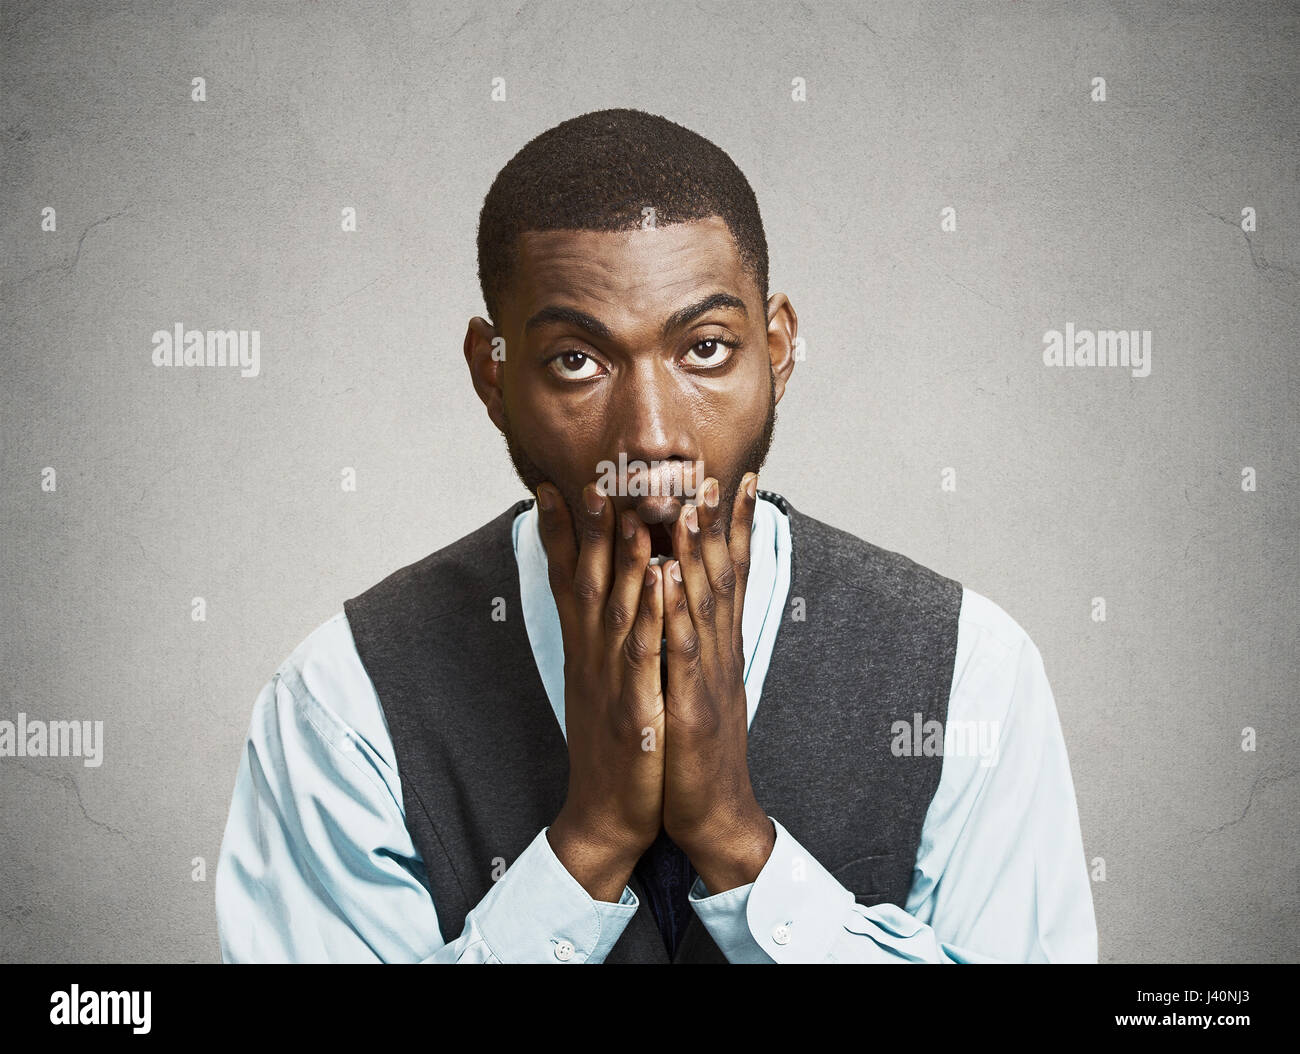 Closeup portrait, headshot young tired, fatigued business man worried, stressed, dragging face down with hands, isolated black, grey background. Negat Stock Photo